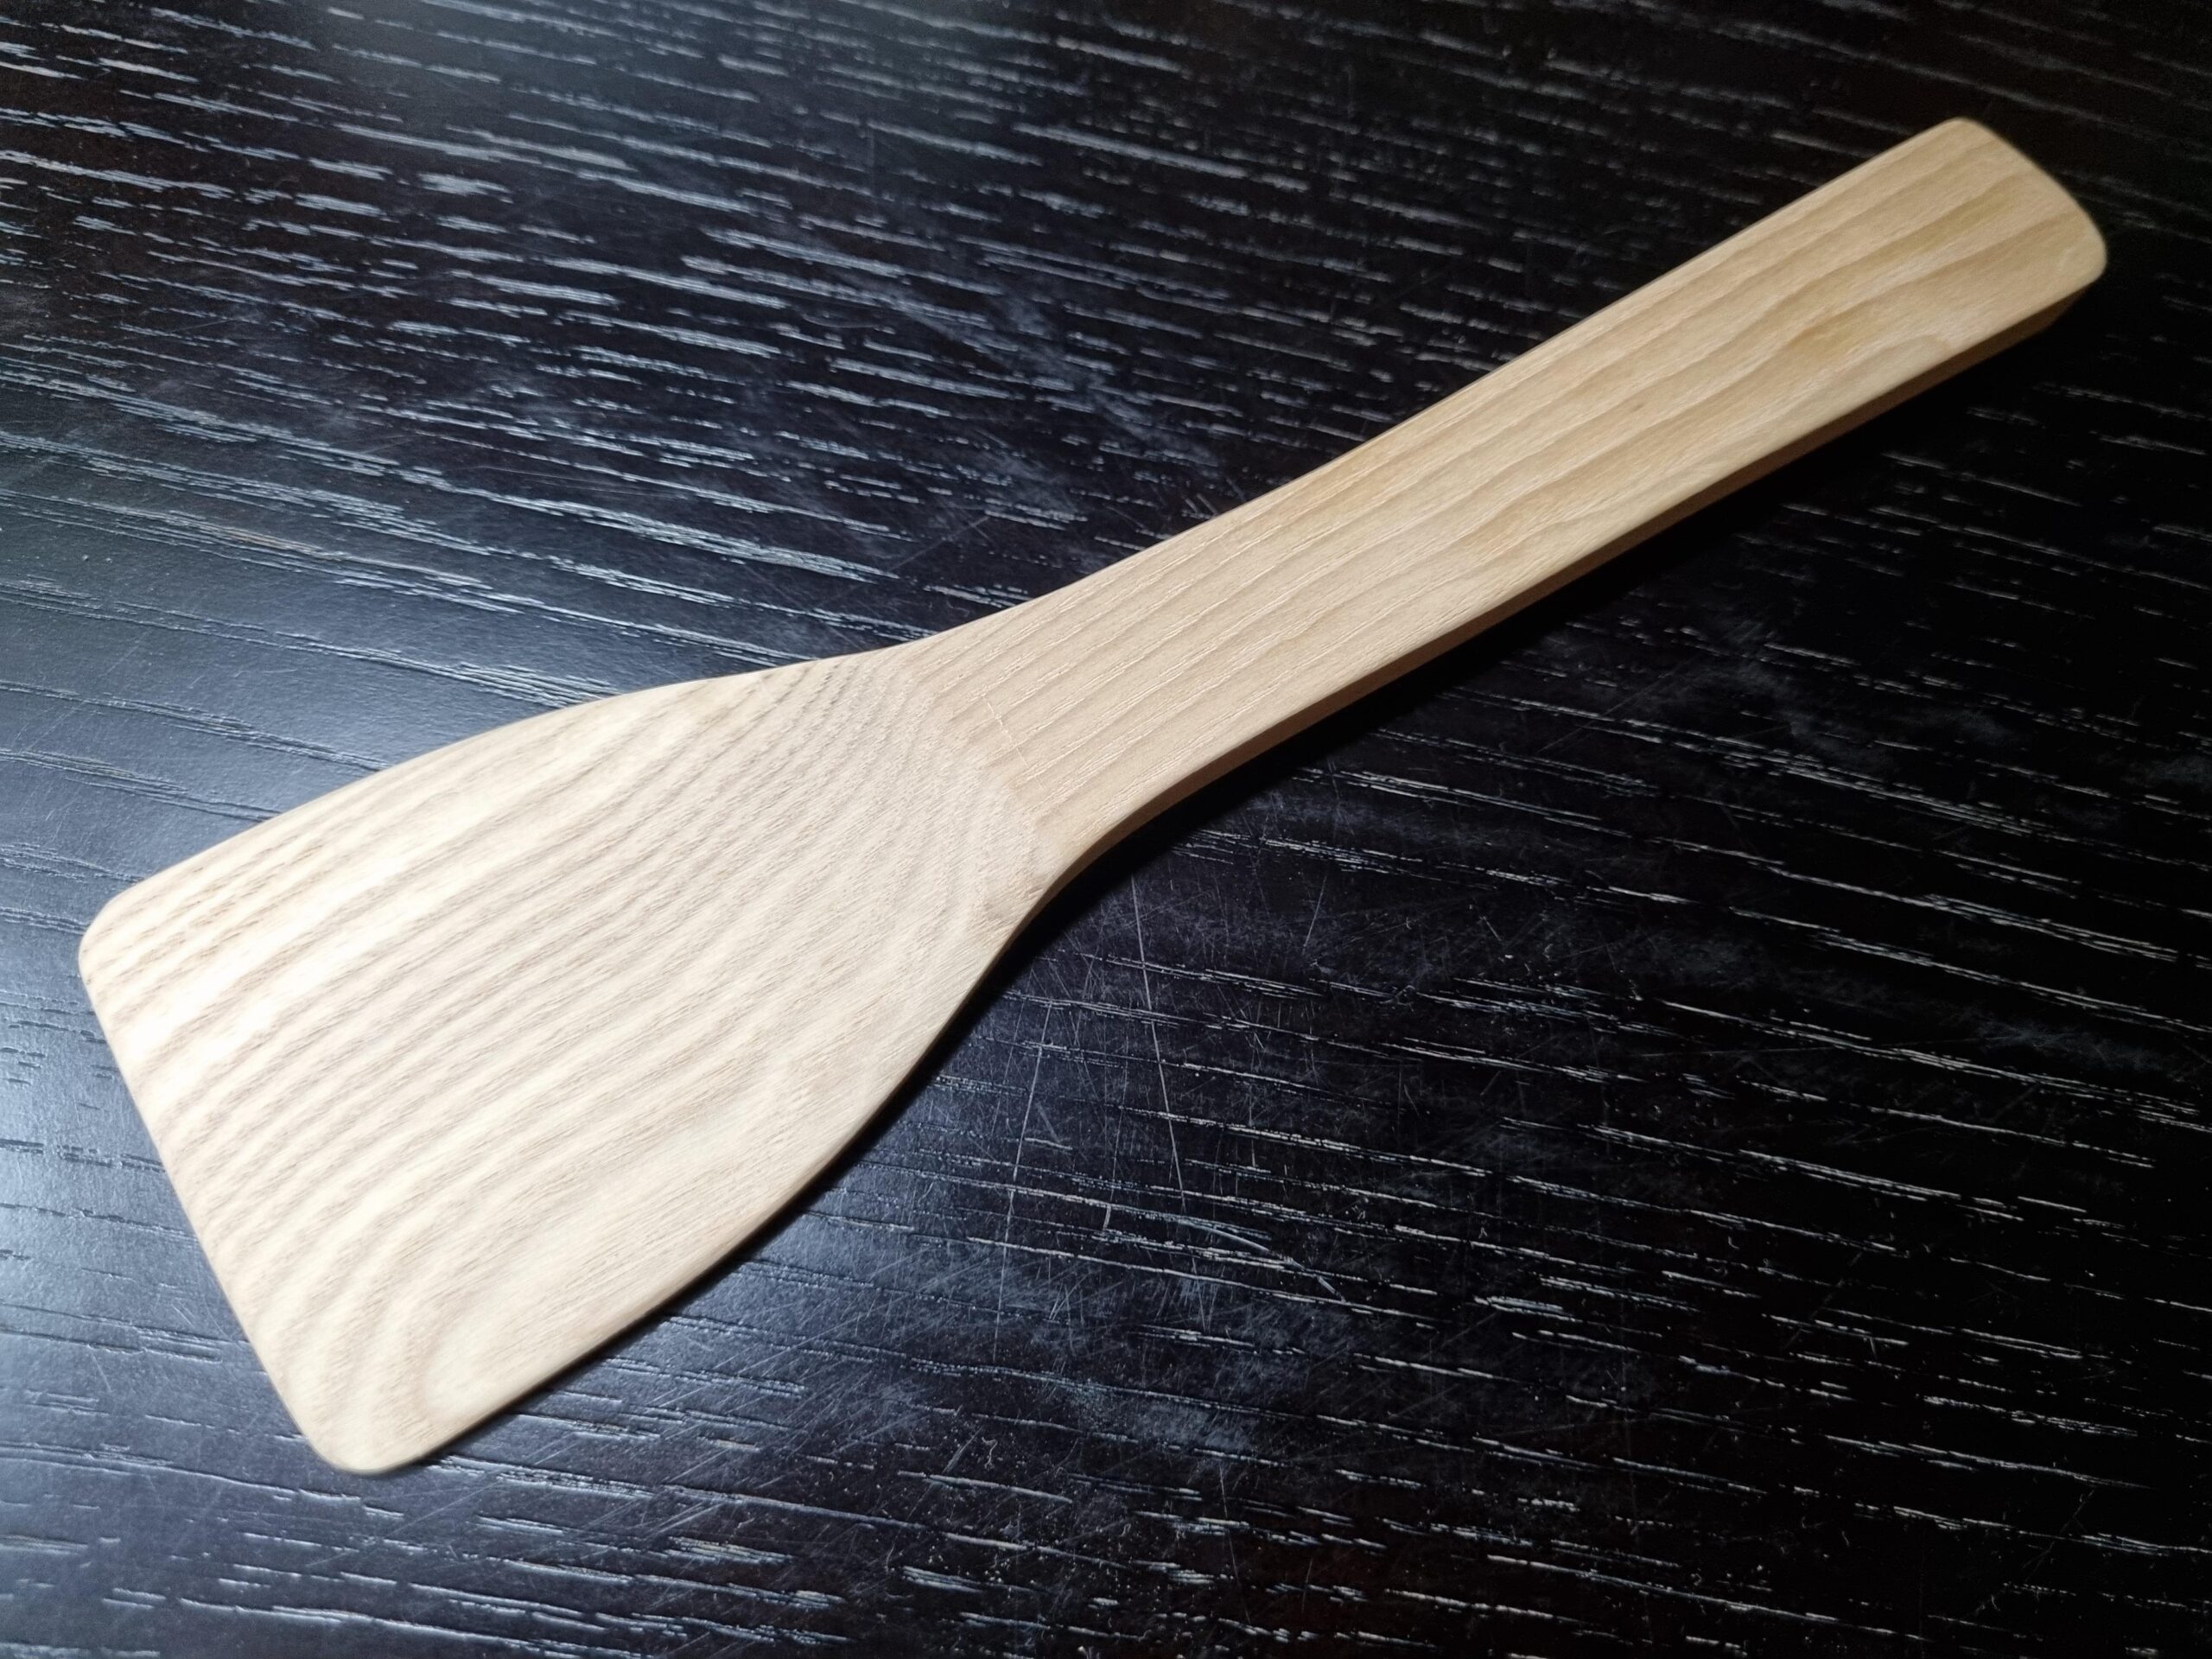 My First Spatula Made A Template From My Existing Bamboo And Cut This American Ash Out On The Bandsaw Shaped And Refined On My Disc And Belt Sander R BeginnerWoodWorking